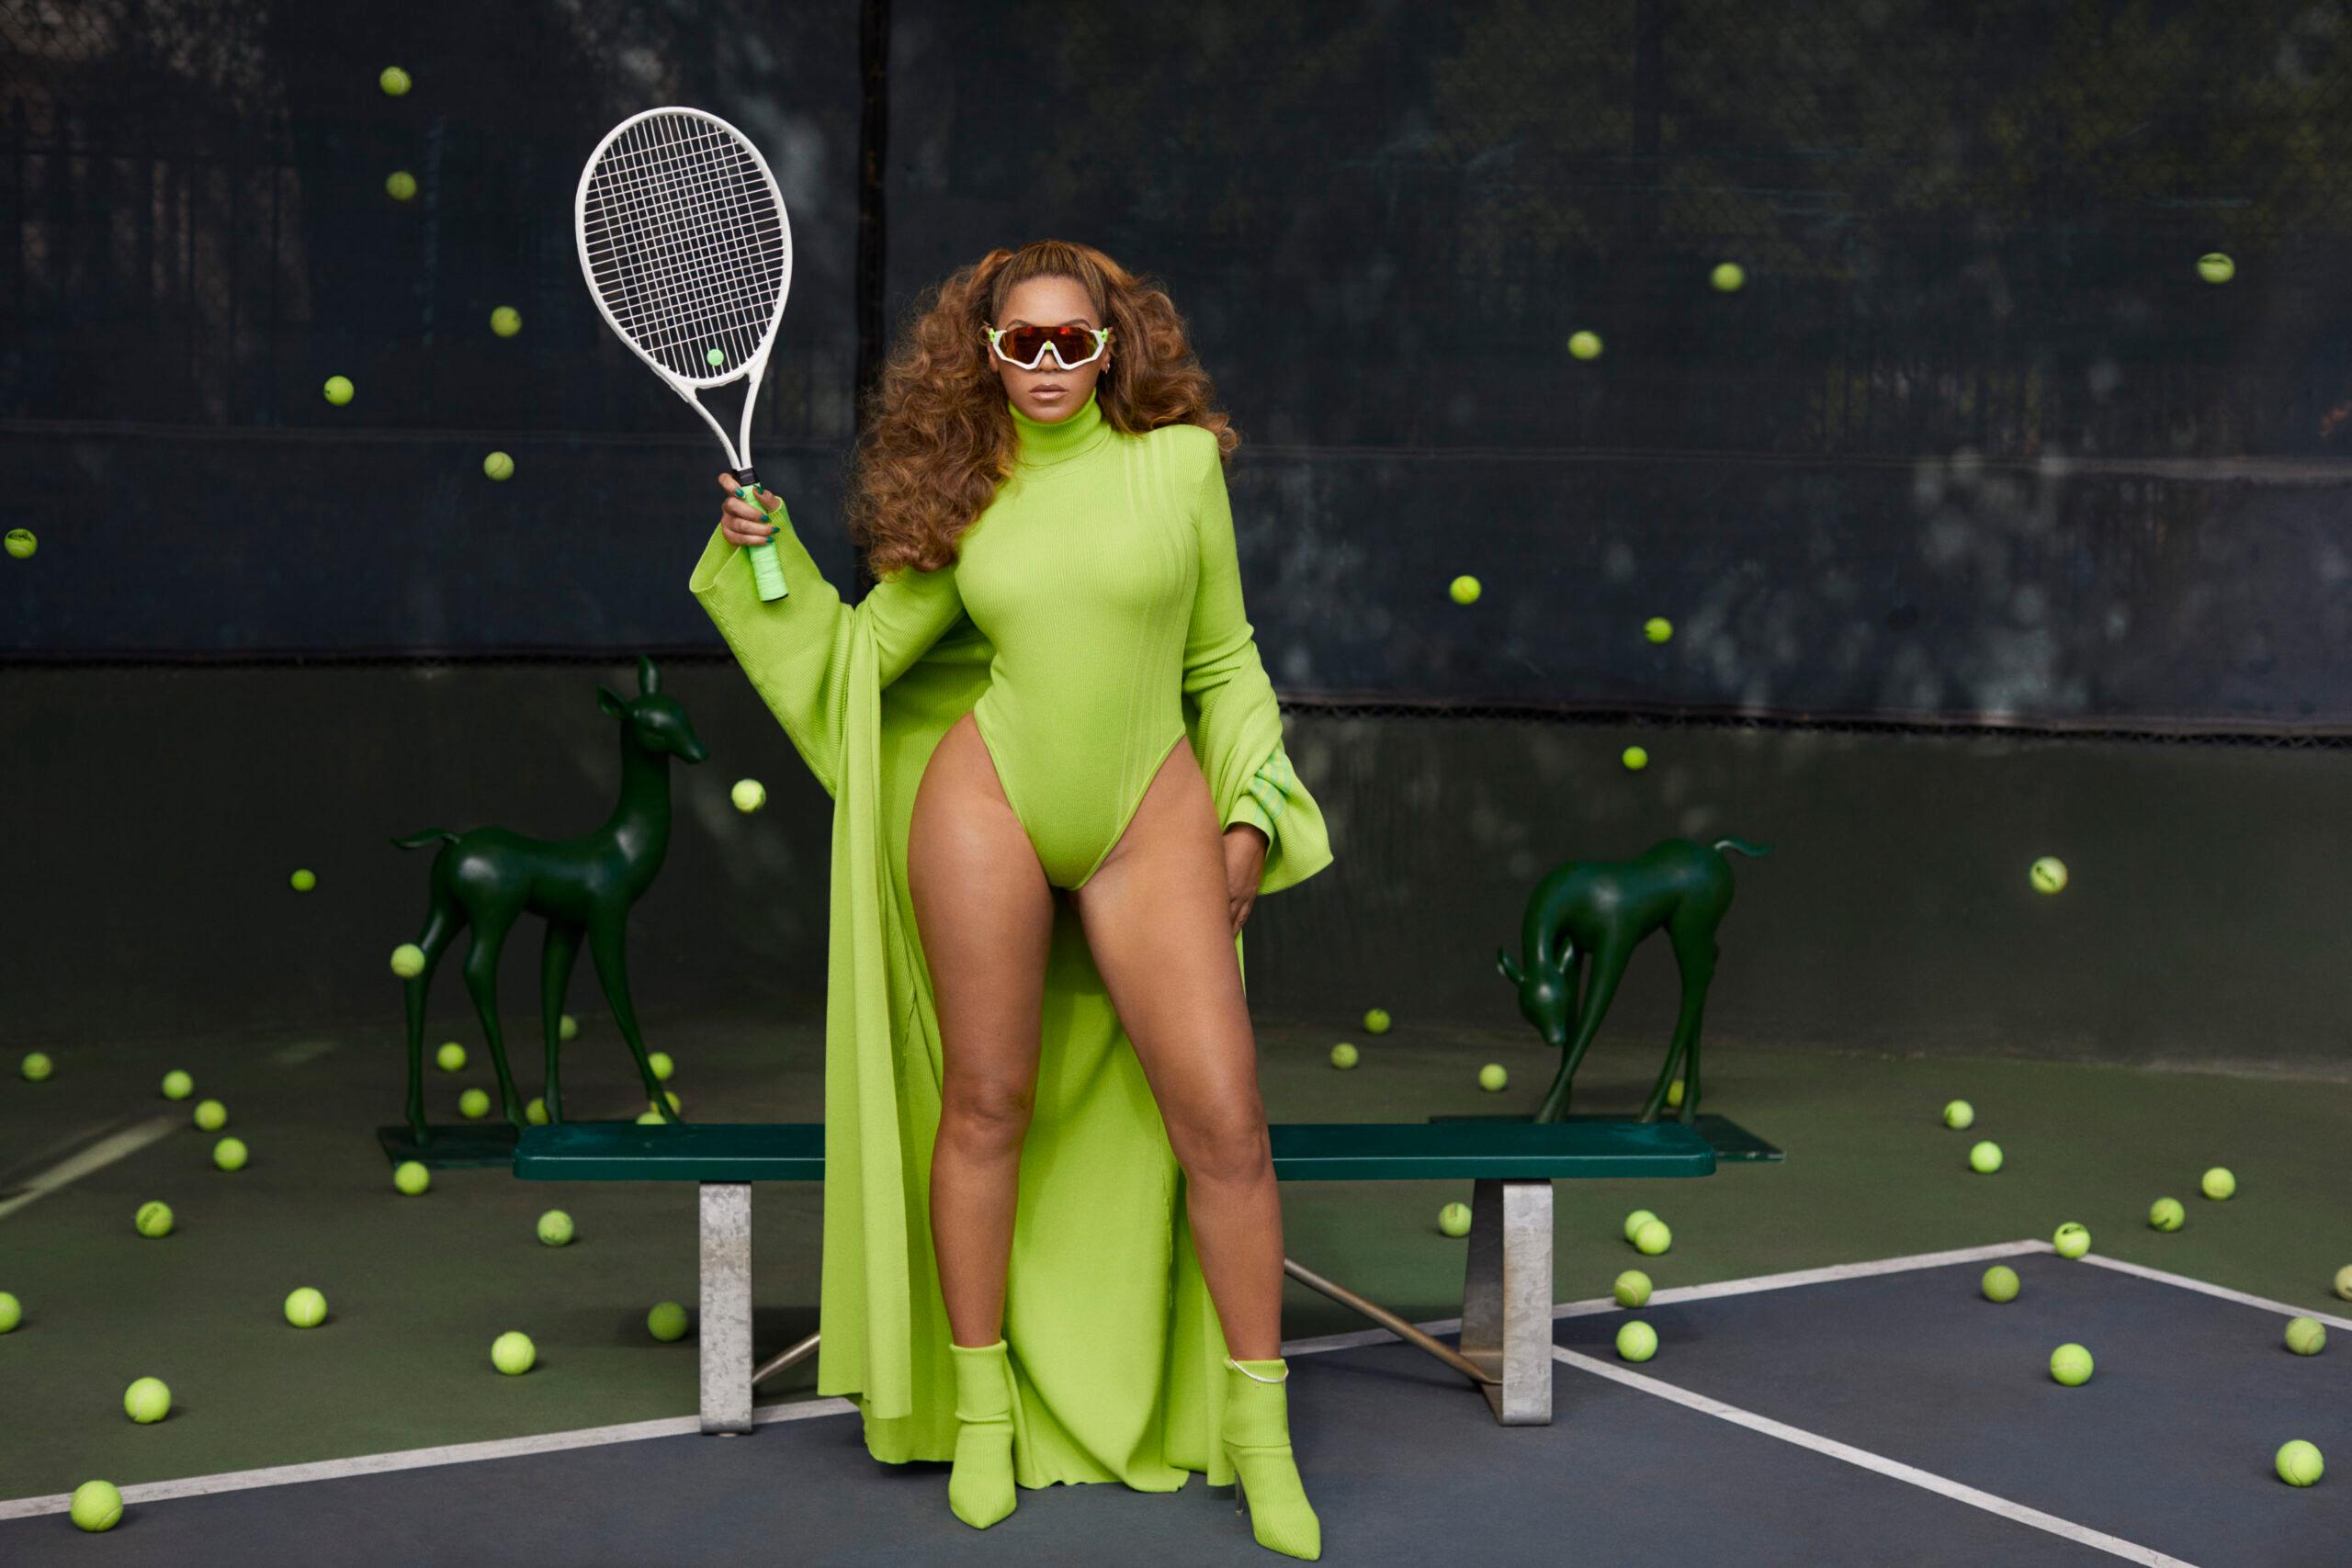 Beyonce hits the tennis court and serves up an all-star cast for launch of adidas x IVY PARK HALLS of IVY collection